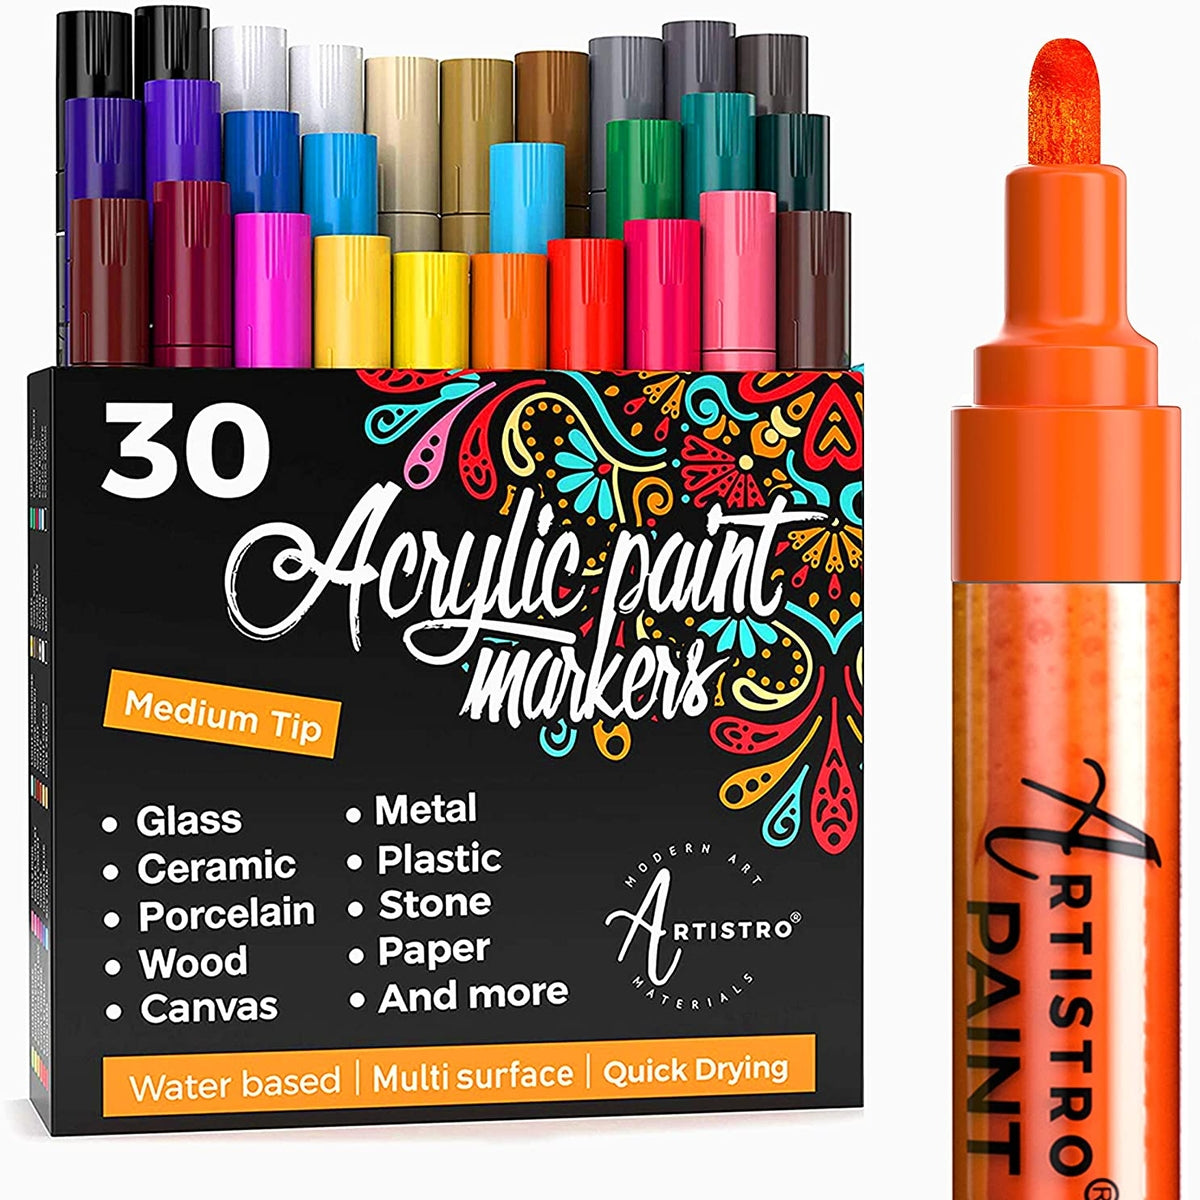 42 Acrylic Paint Markers – ARTISTRO Extra Fine Tip Paint Pens